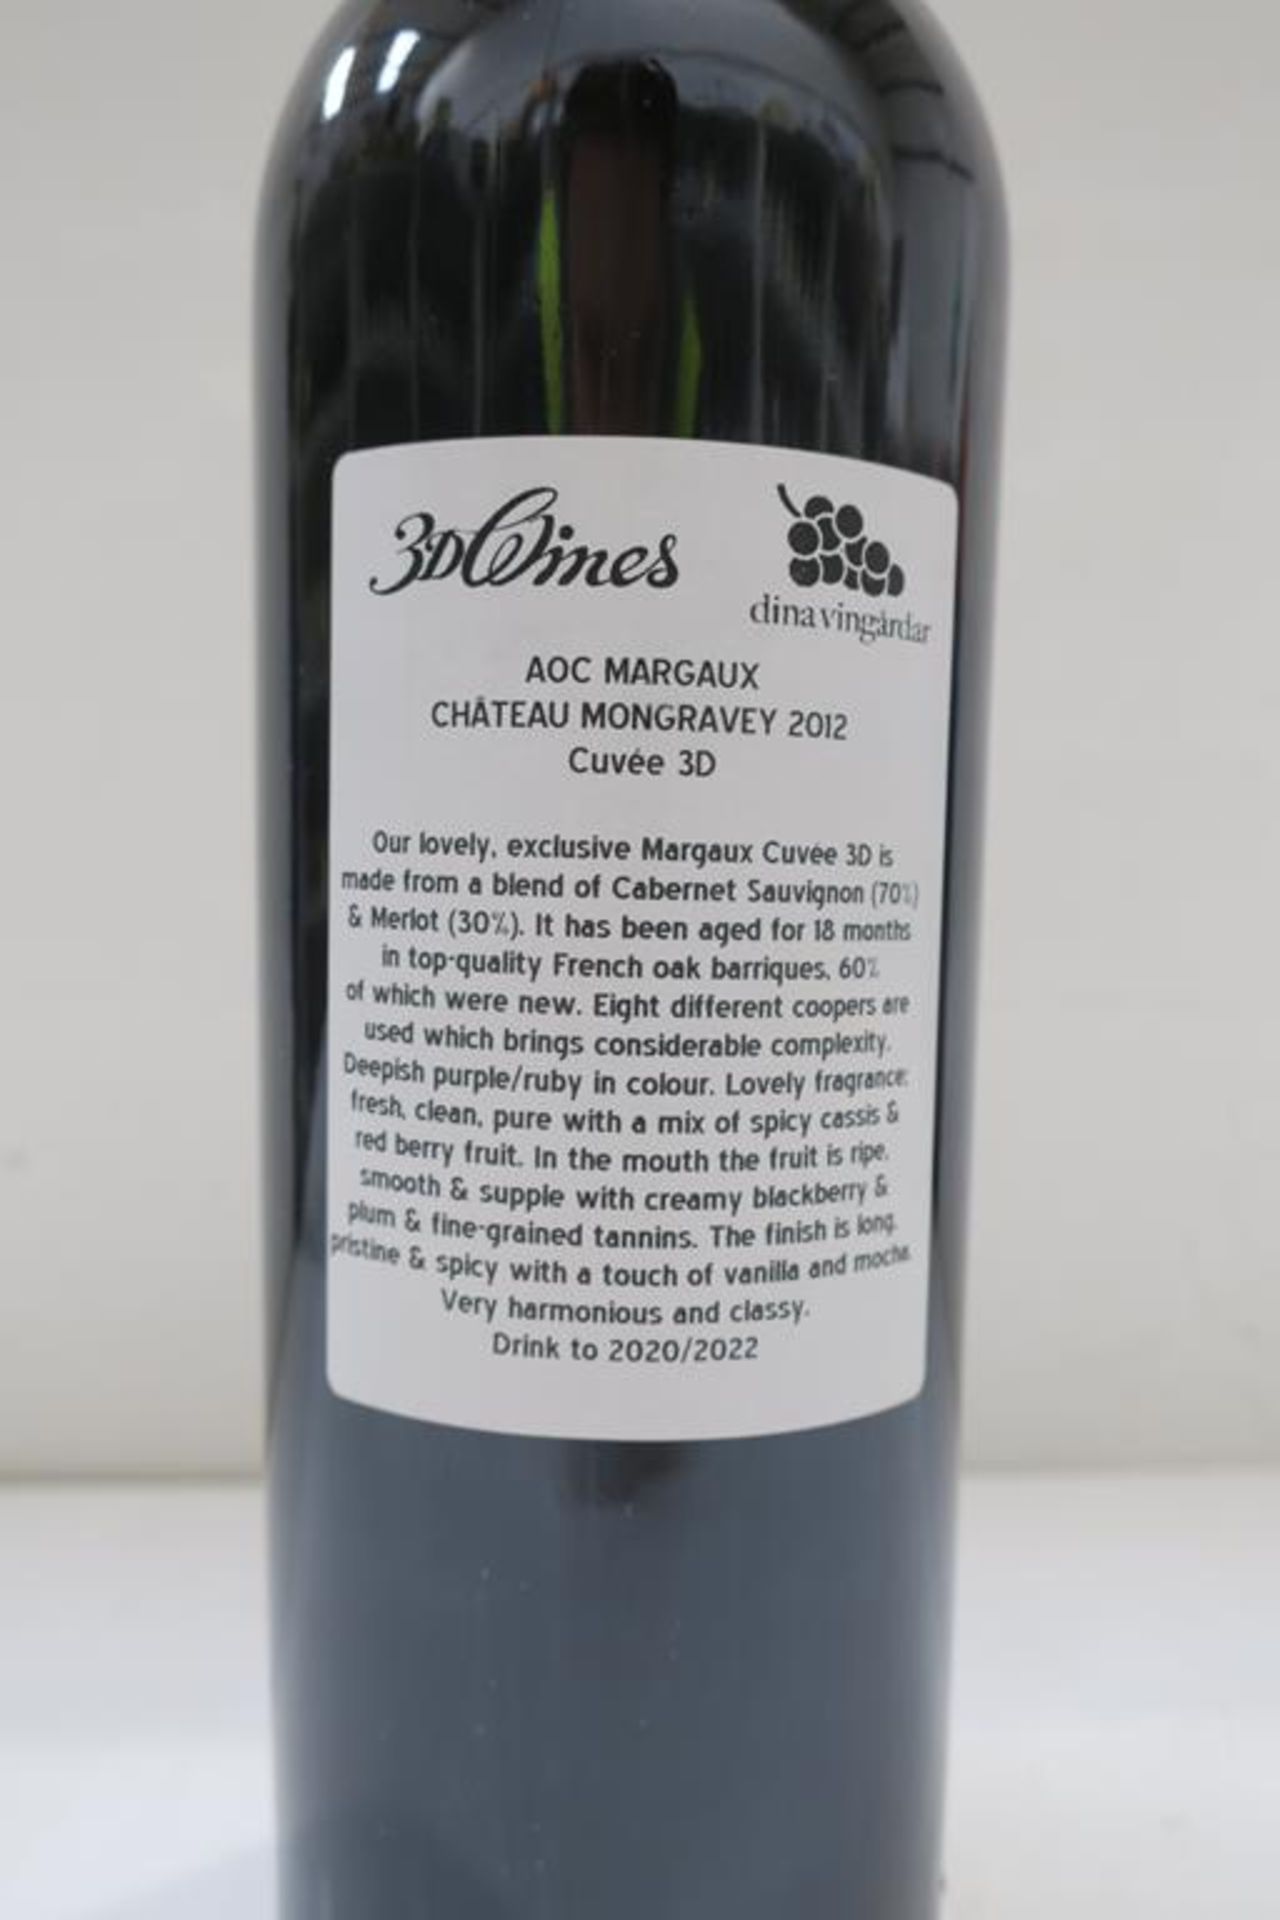 12 X Bottles of Chateau Mongravey 2012 Red Wine - Image 2 of 2